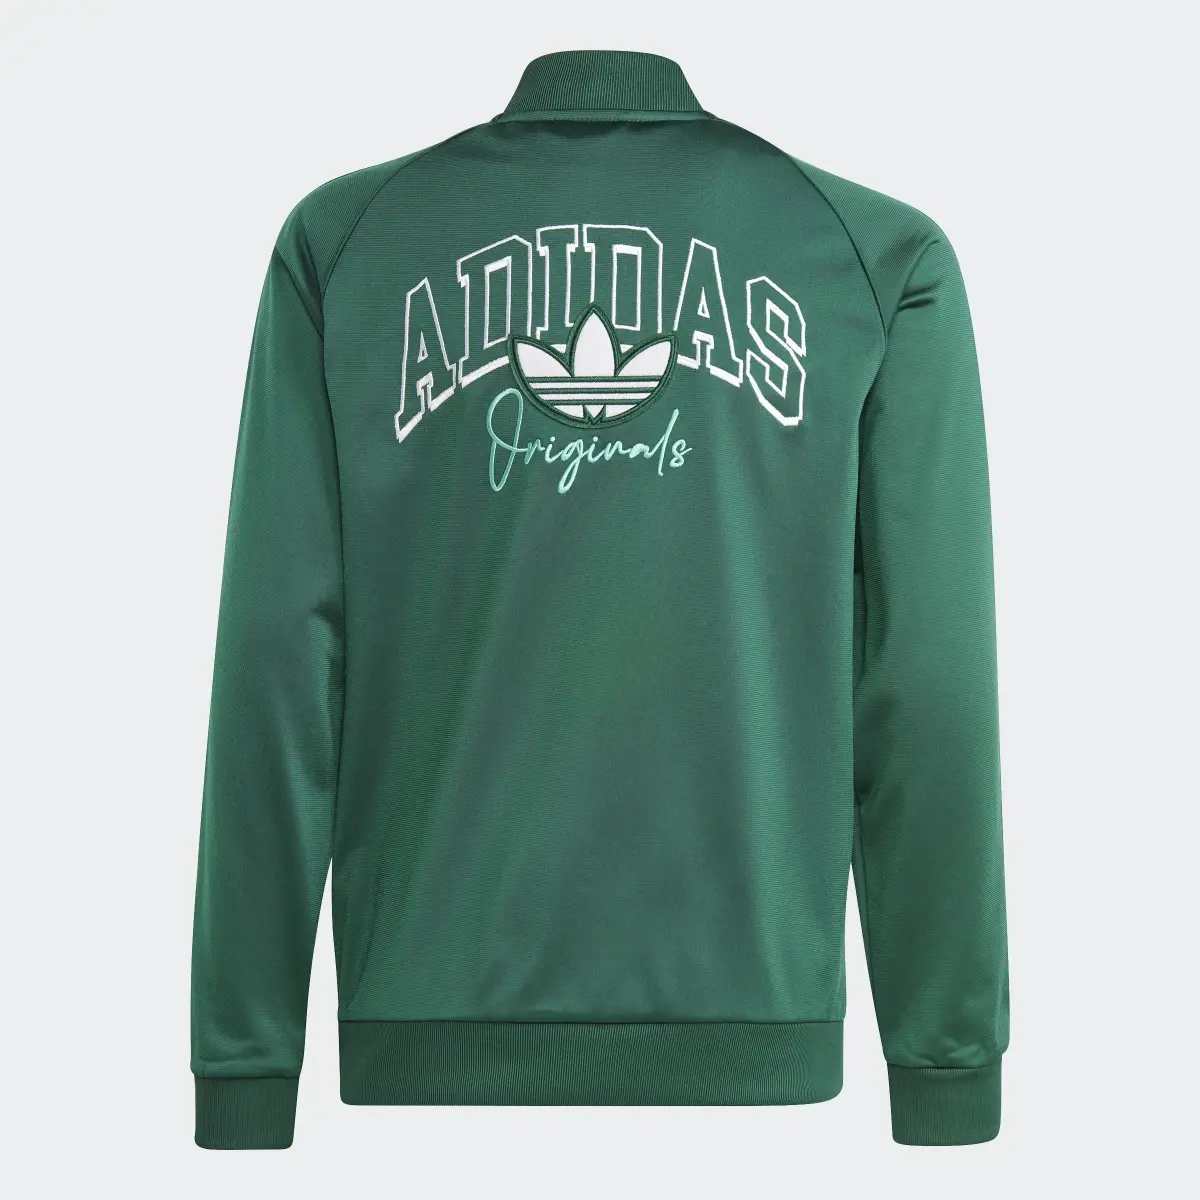 Adidas Track top Collegiate Graphic Pack SST. 2